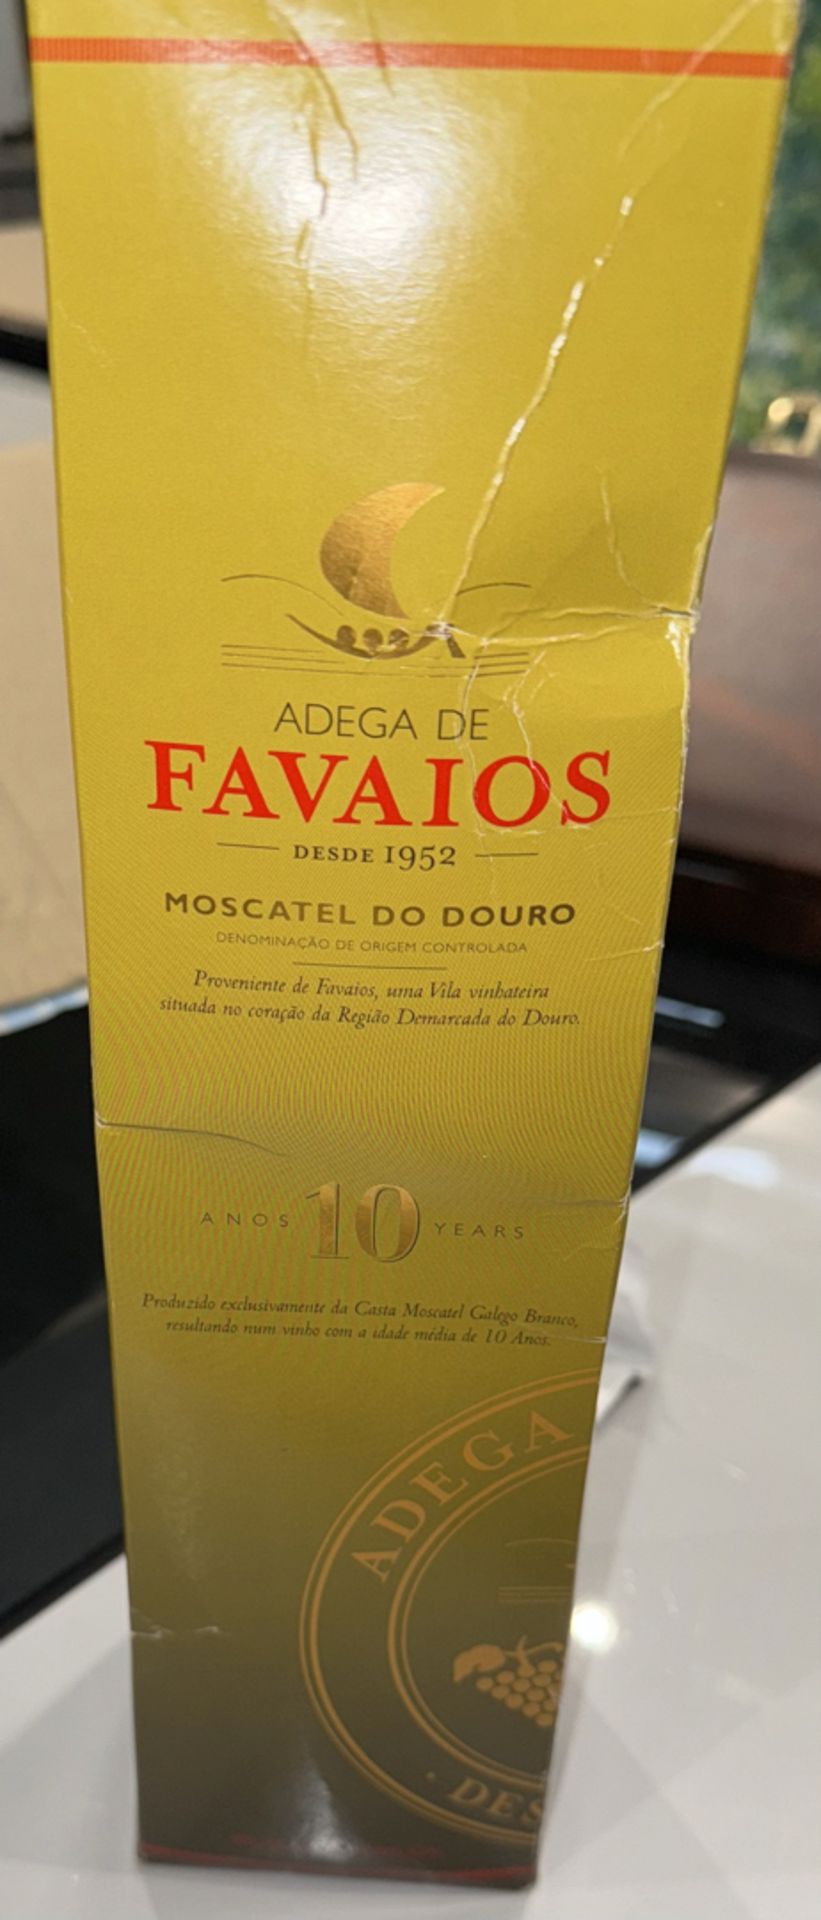 Favaios 10 Year Old Moscatel - New in Box - Image 2 of 3